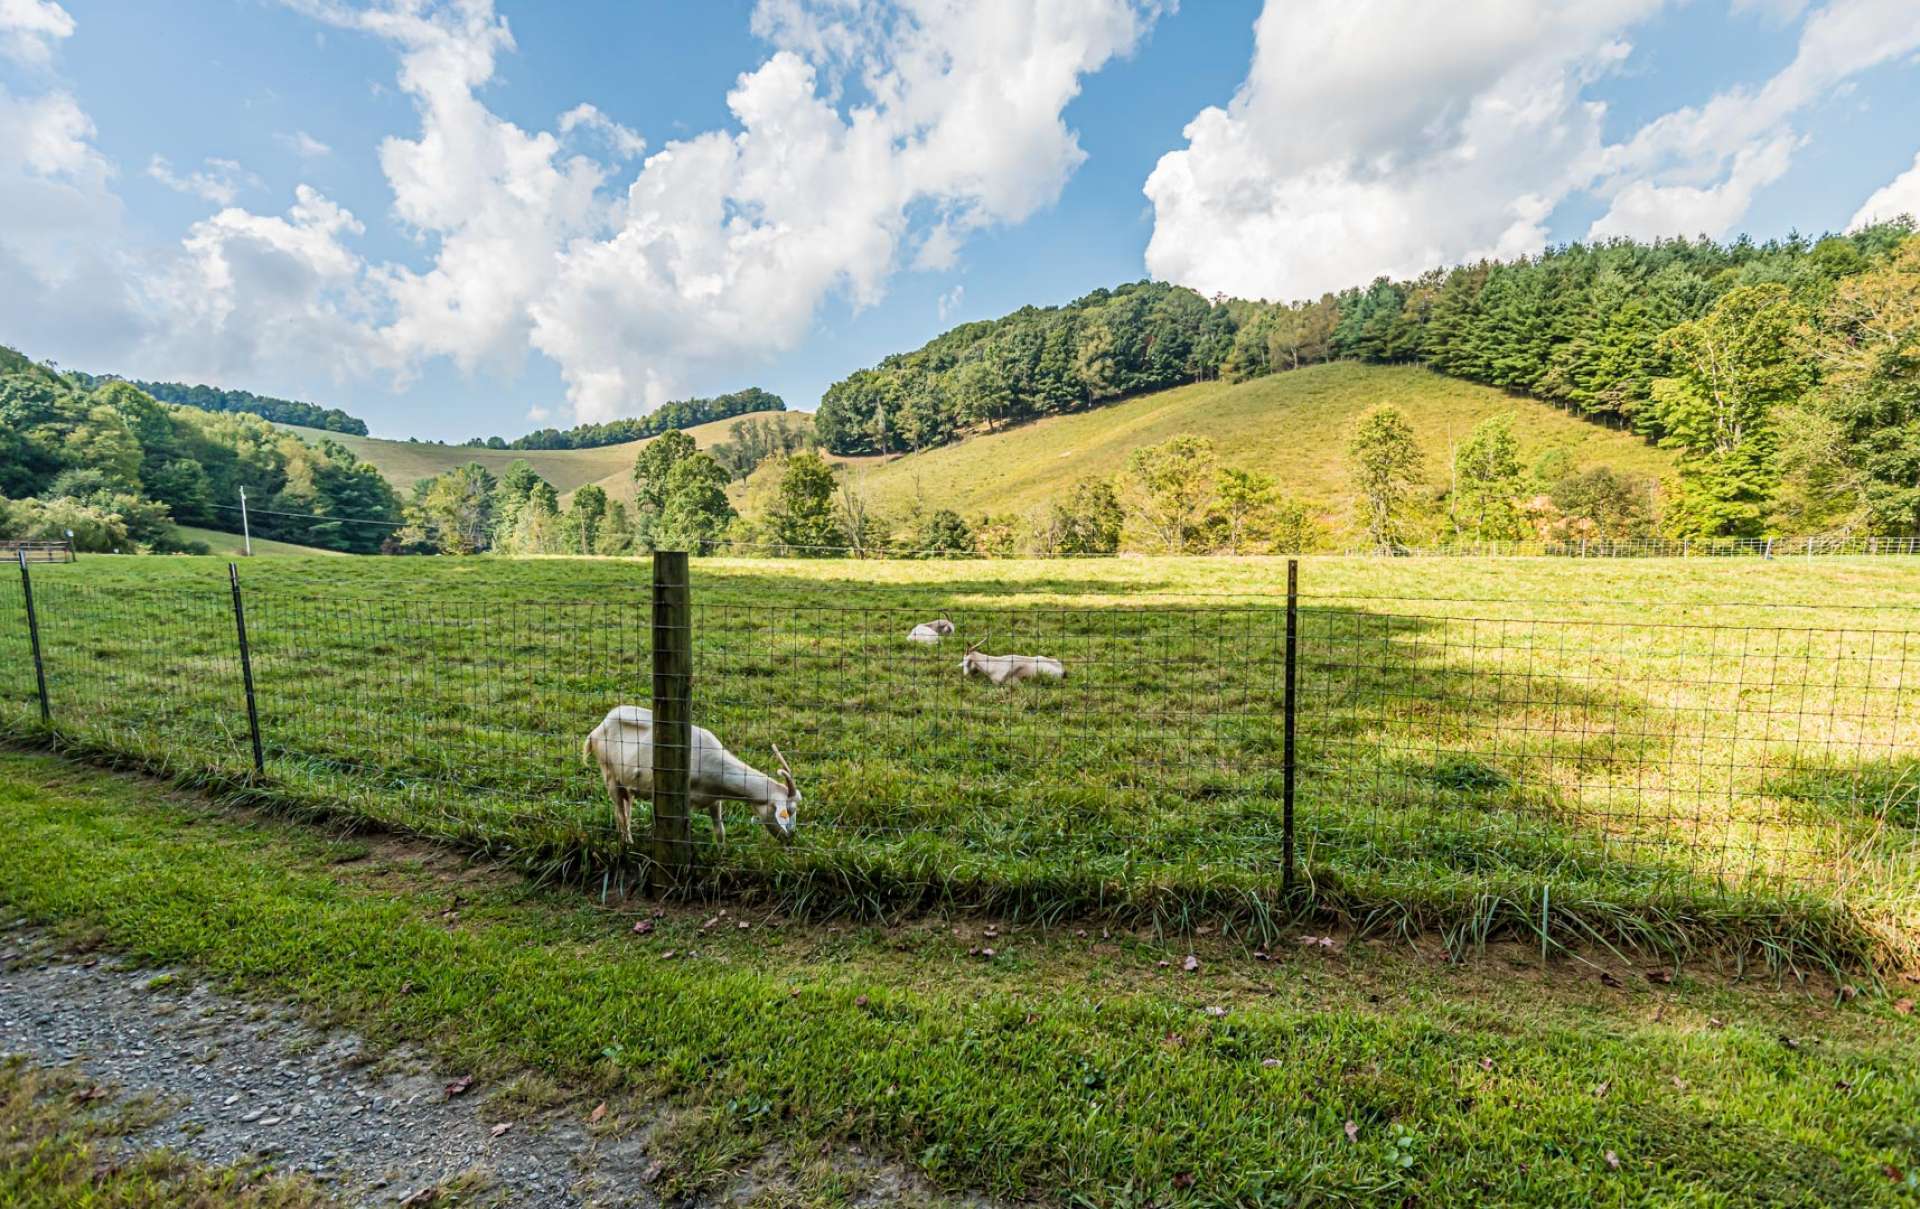 Fenced pastures are perfect for horses, cattle, or other livestock. There is plenty of space for gardening and crops. You might want to start your own High Country Vineyard.